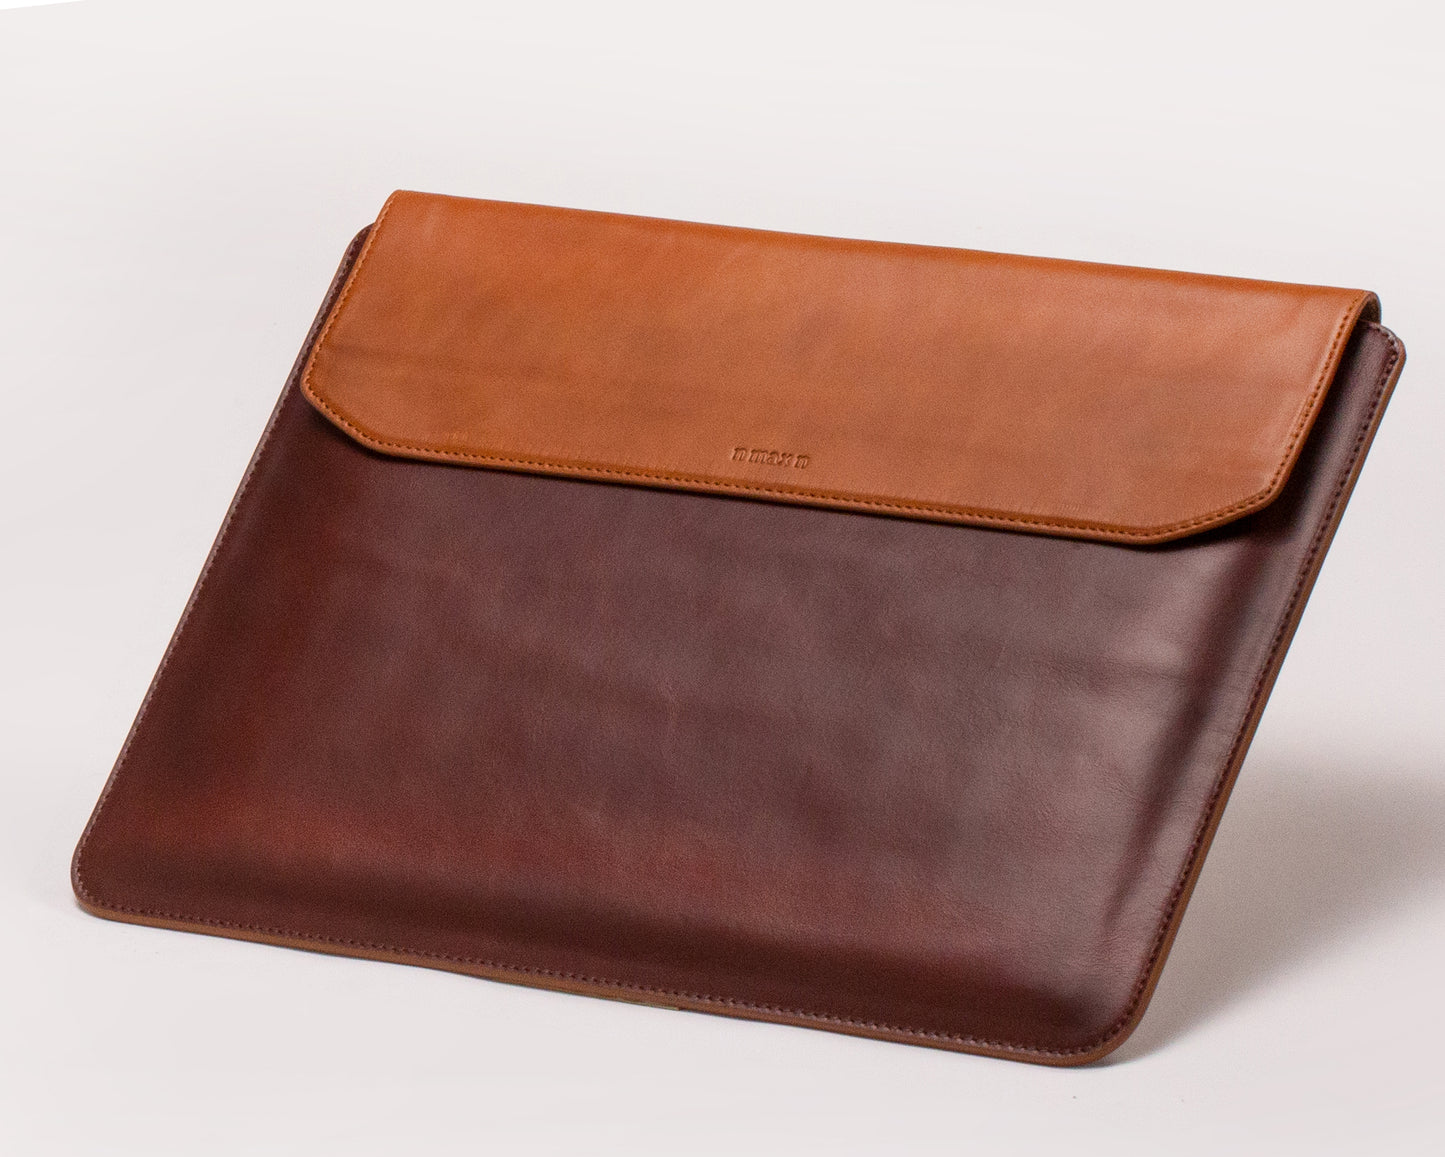 Genuine Leather Sleeve case “Fleeve” for laptop 13inch